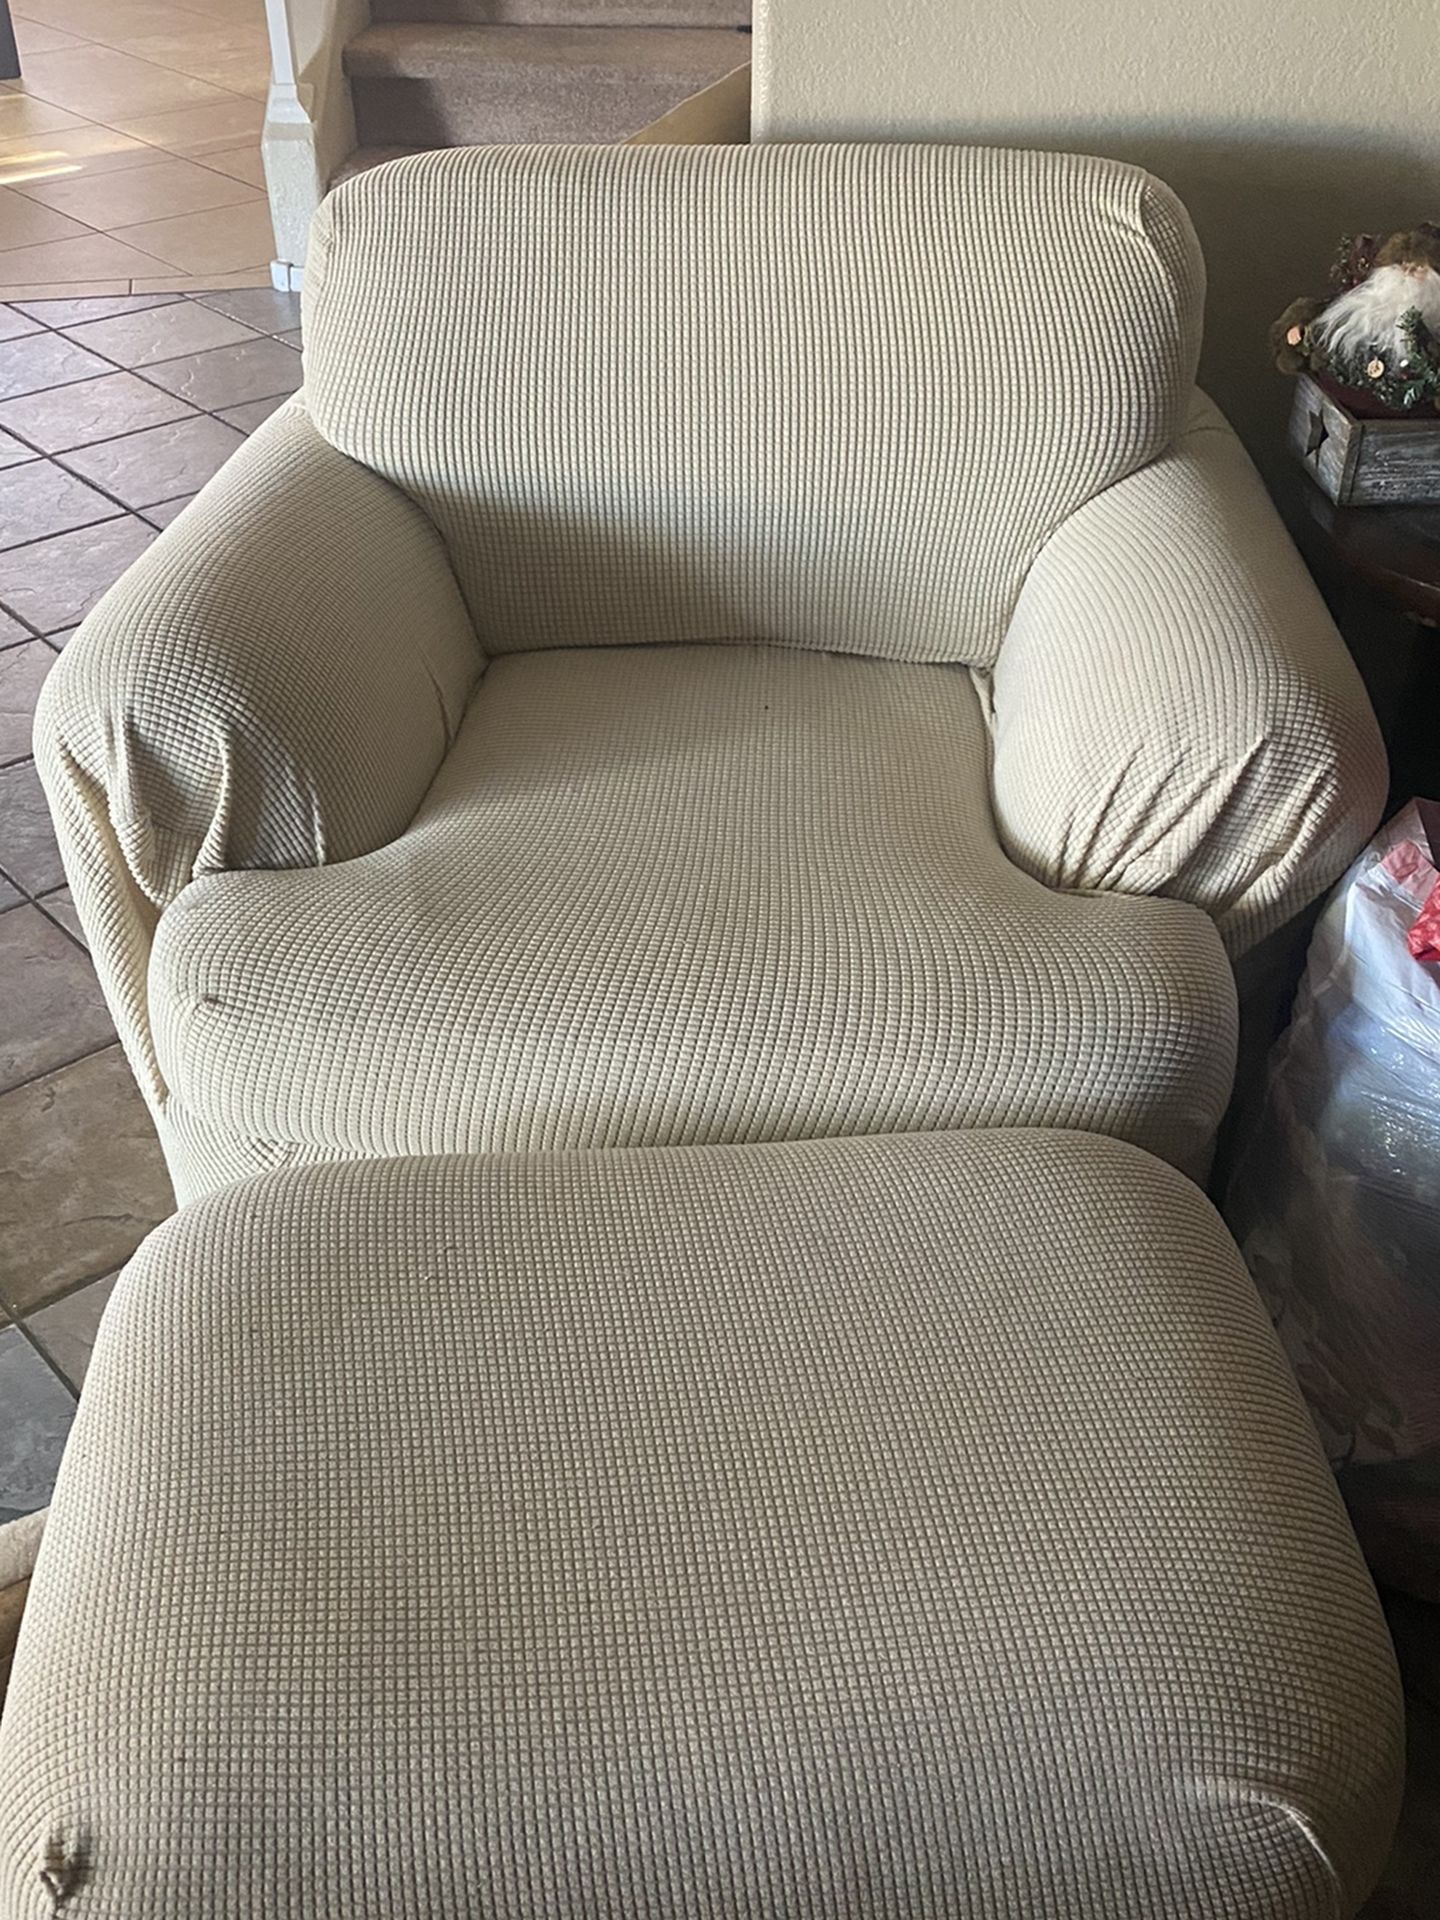 Free For Pick Up! Arm Chair And Ottoman